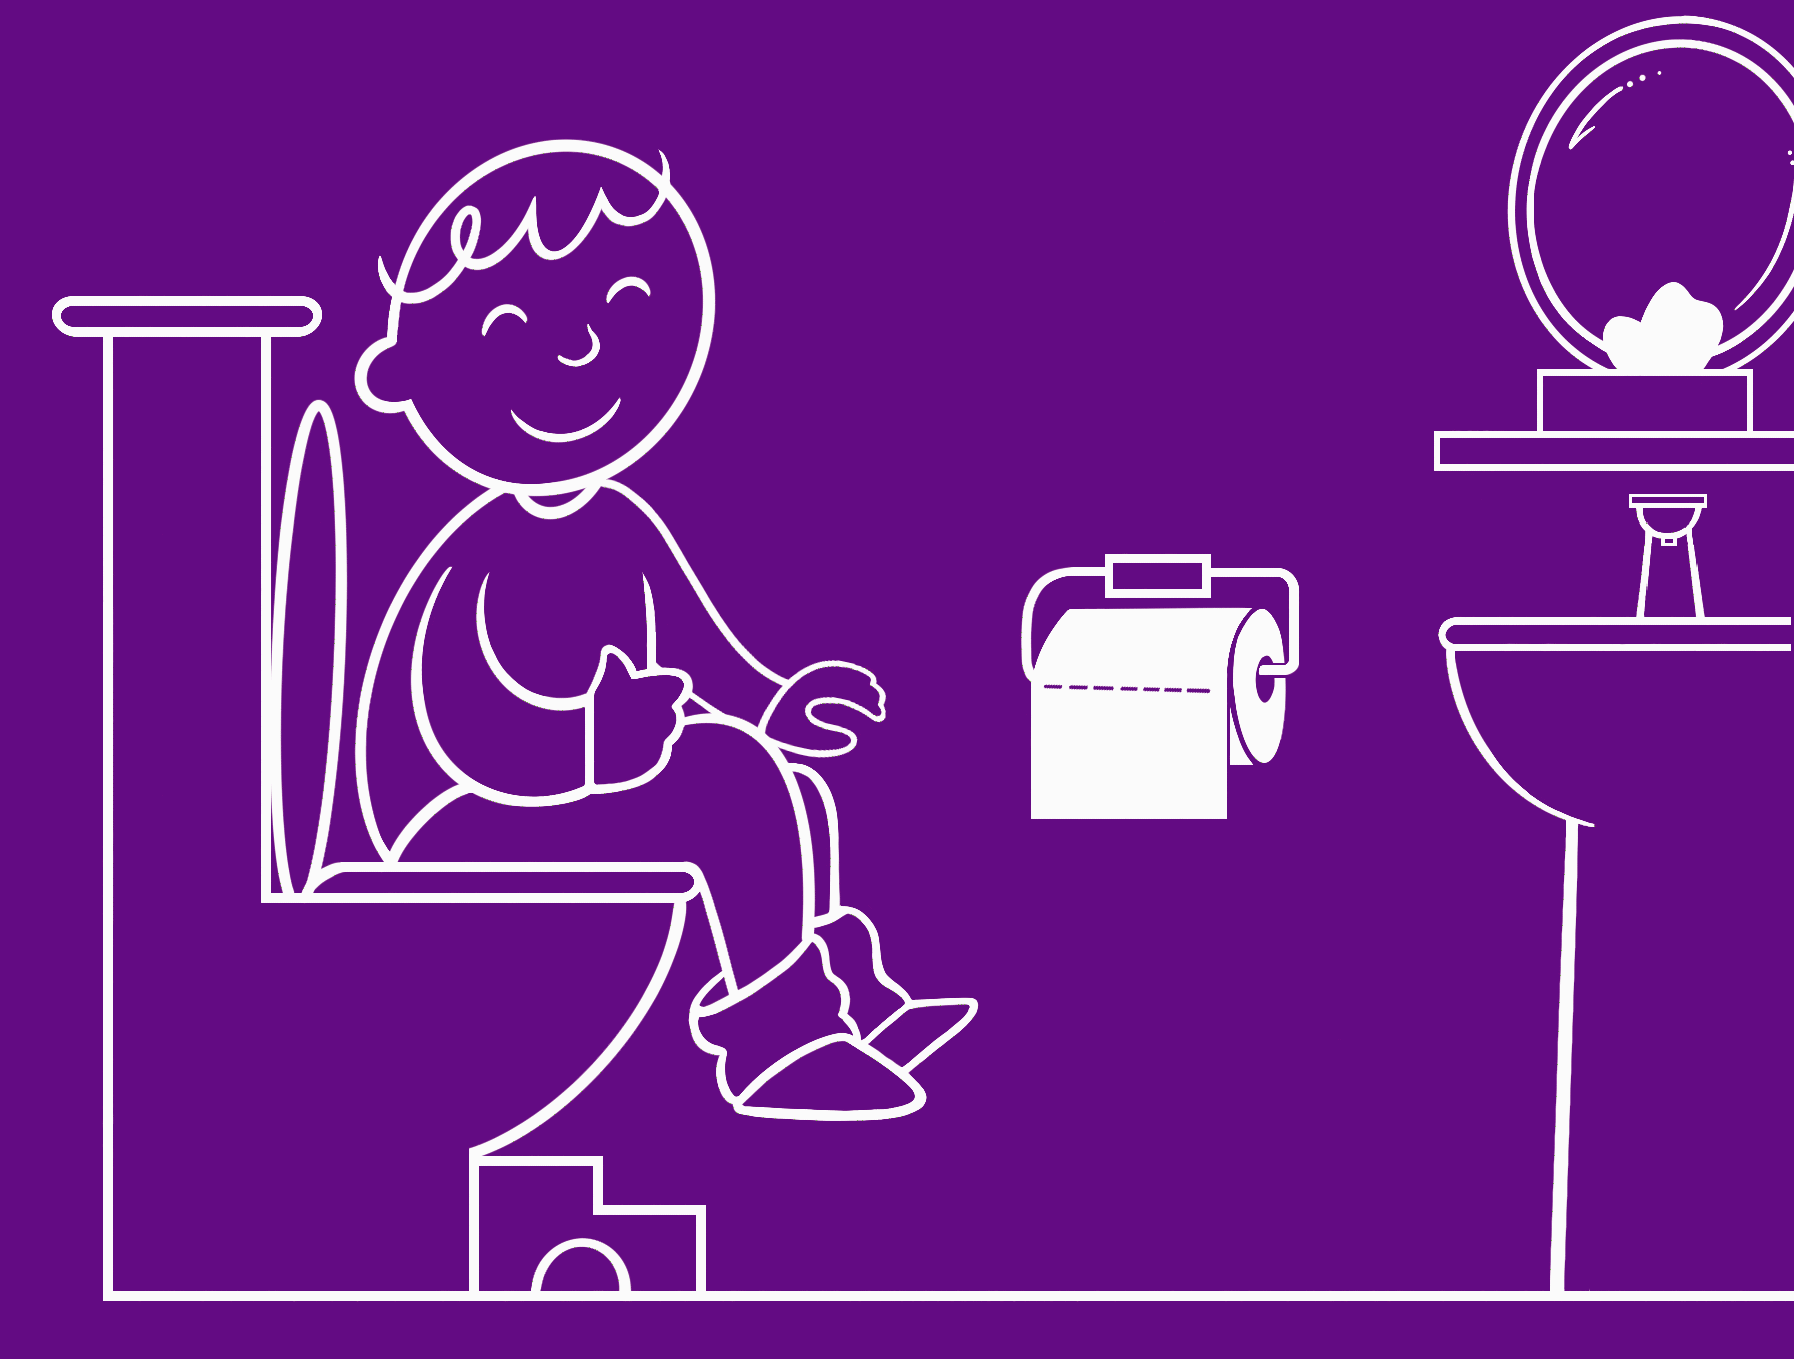 An illustrative gif of a young boy sitting on the toilet, pulling toilet paper off the roll.